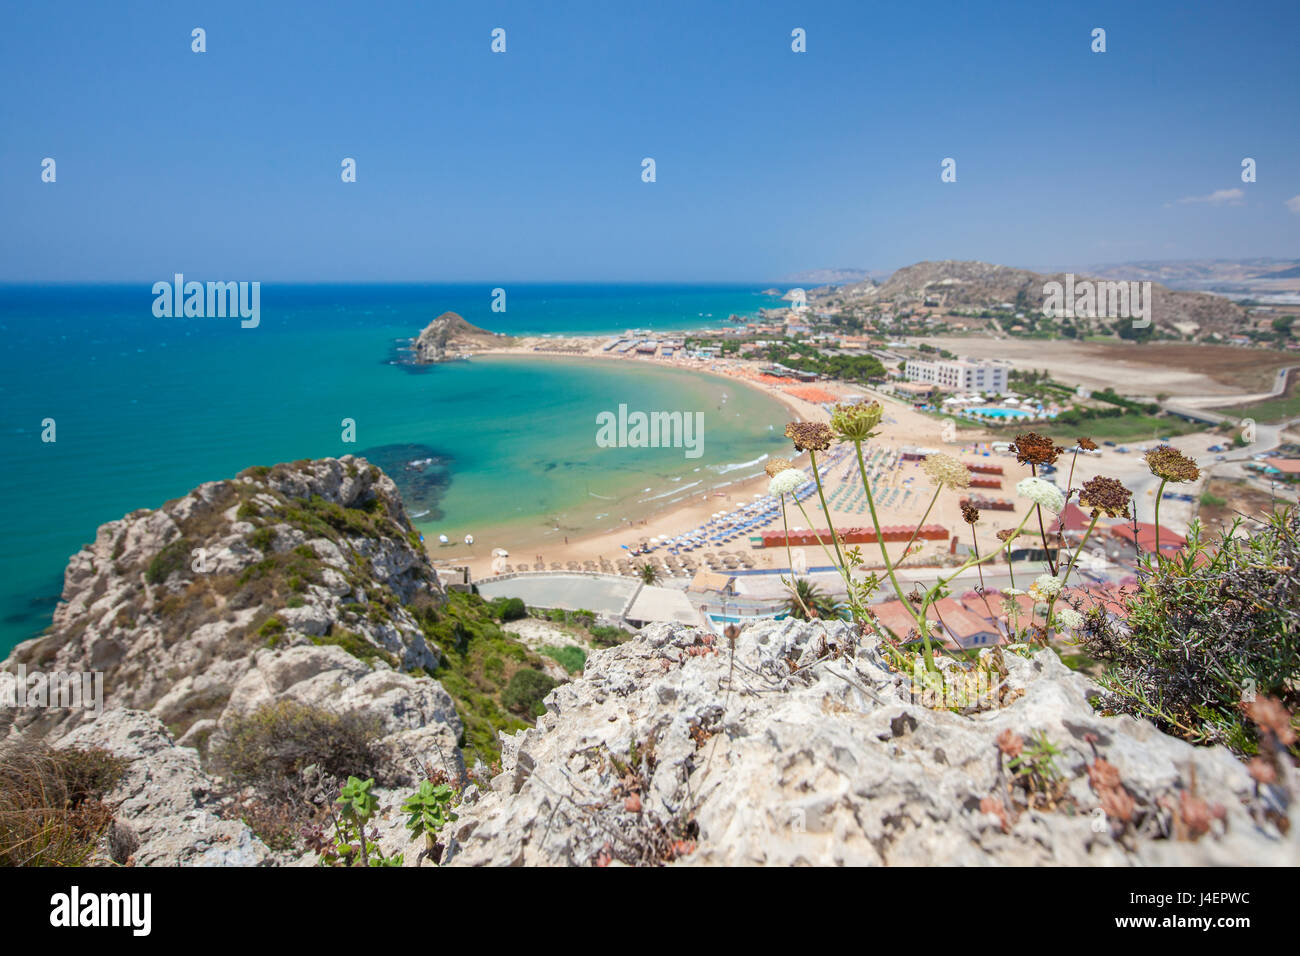 The cliffs frame the turquoise sea and the sandy beach of Licata, Province of Agrigento, Sicily, Italy, Mediterranean, Europe Stock Photo